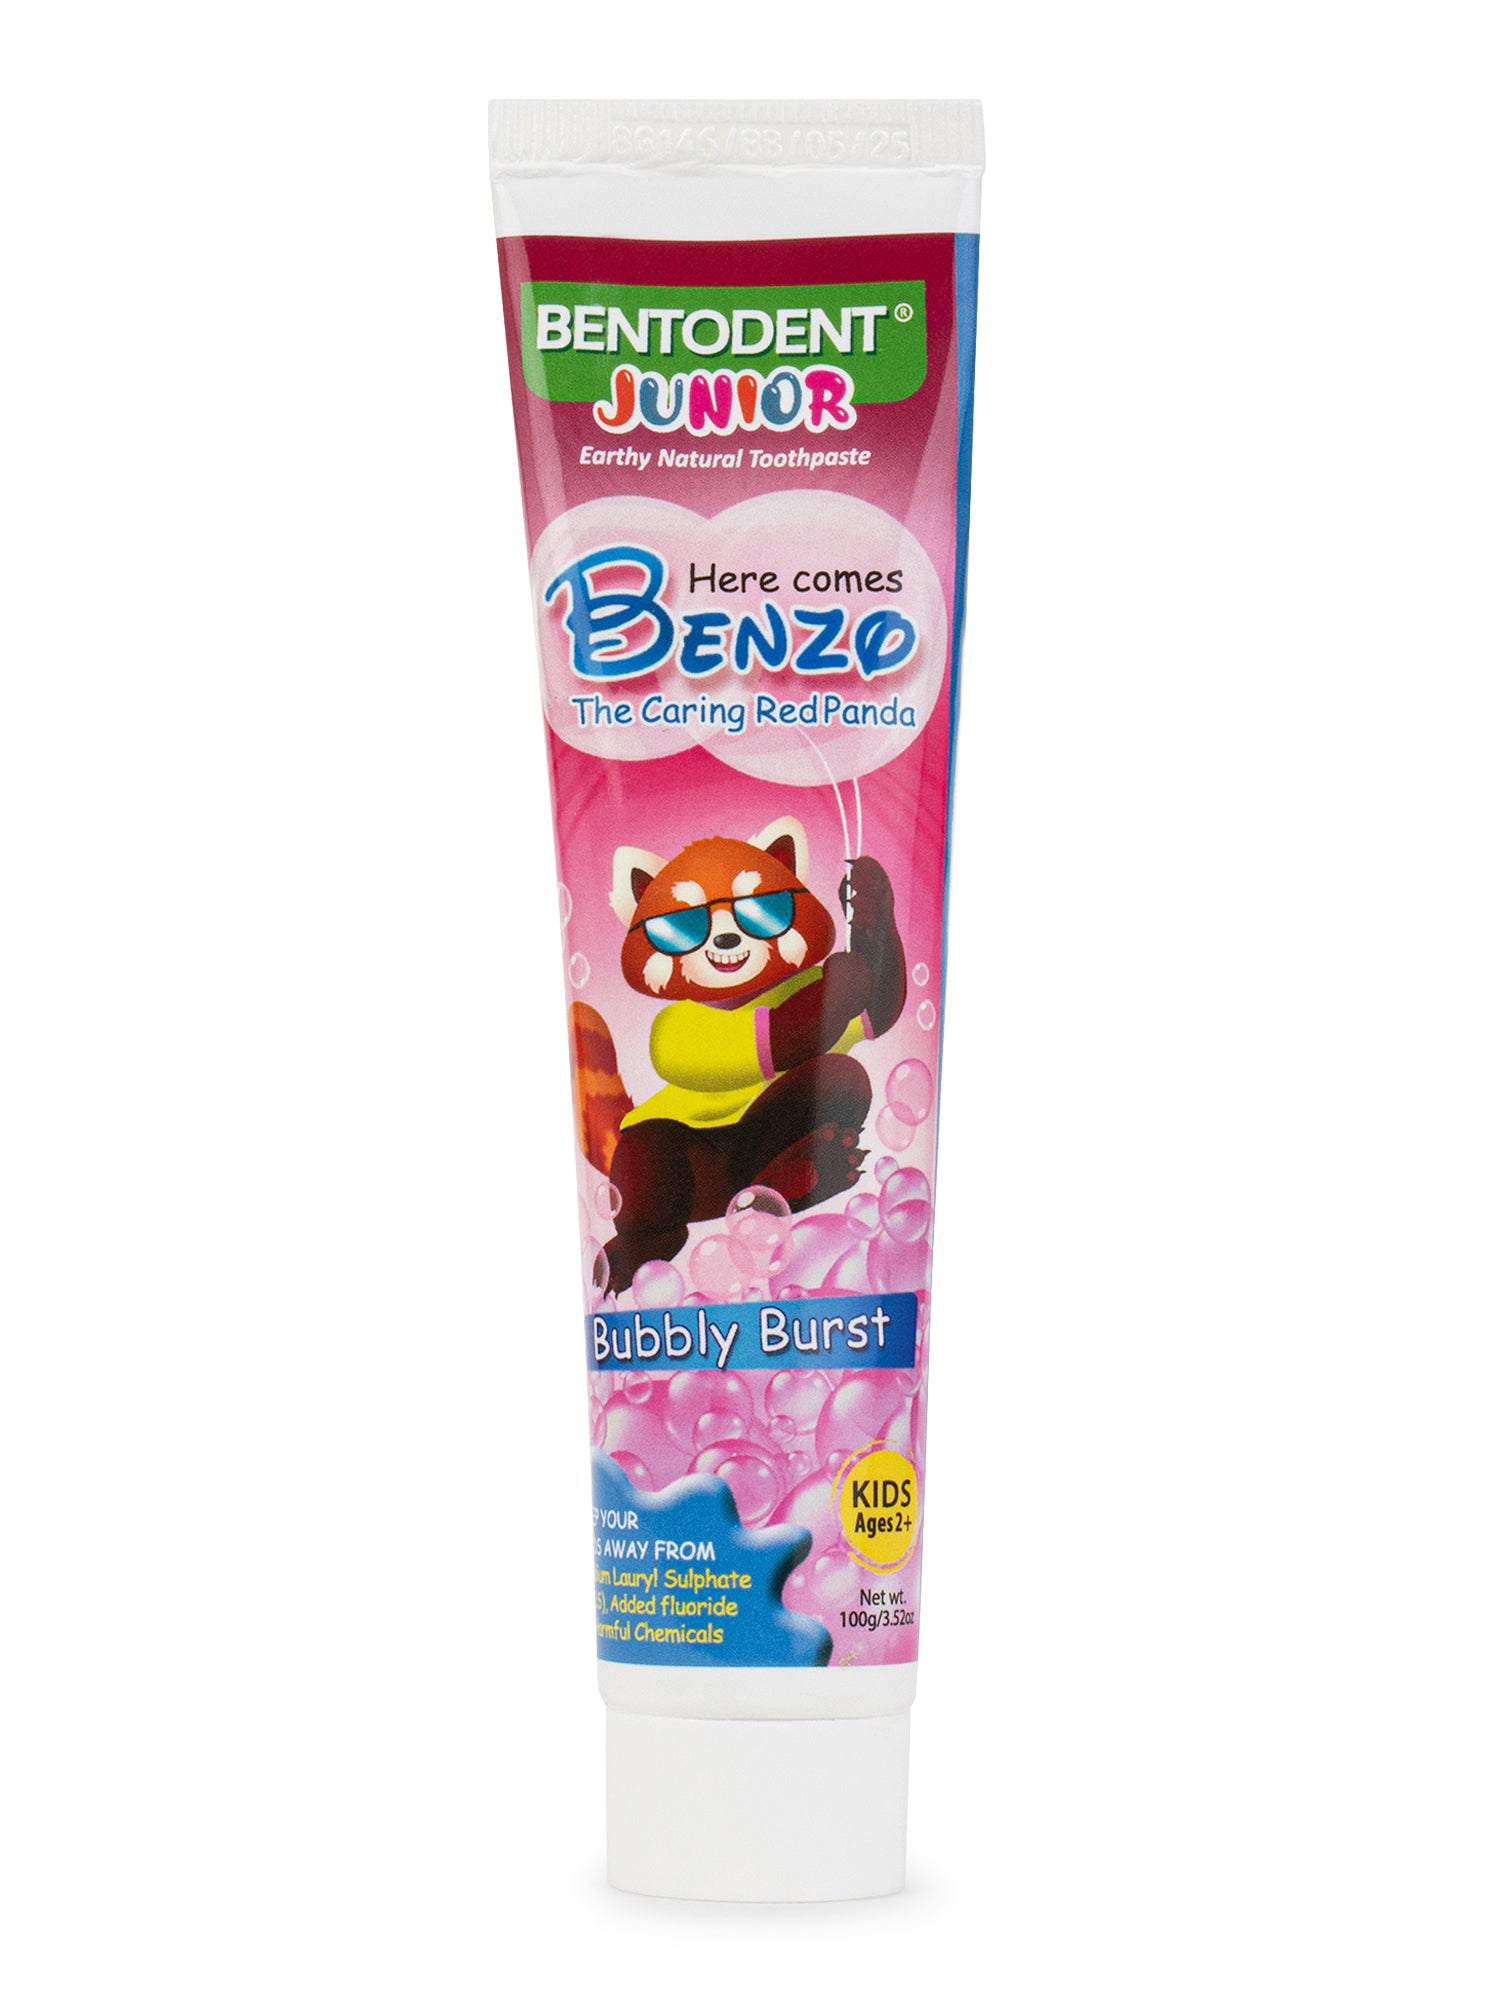 Bentodent 100% Natural Kids Bubbly Burst Toothpaste, Fluoride Free,  Sls Free, Complete oral care protection for kids, Fresh Breath, Best toothpaste for kids 2+ years 100g - Indian Dental Organization